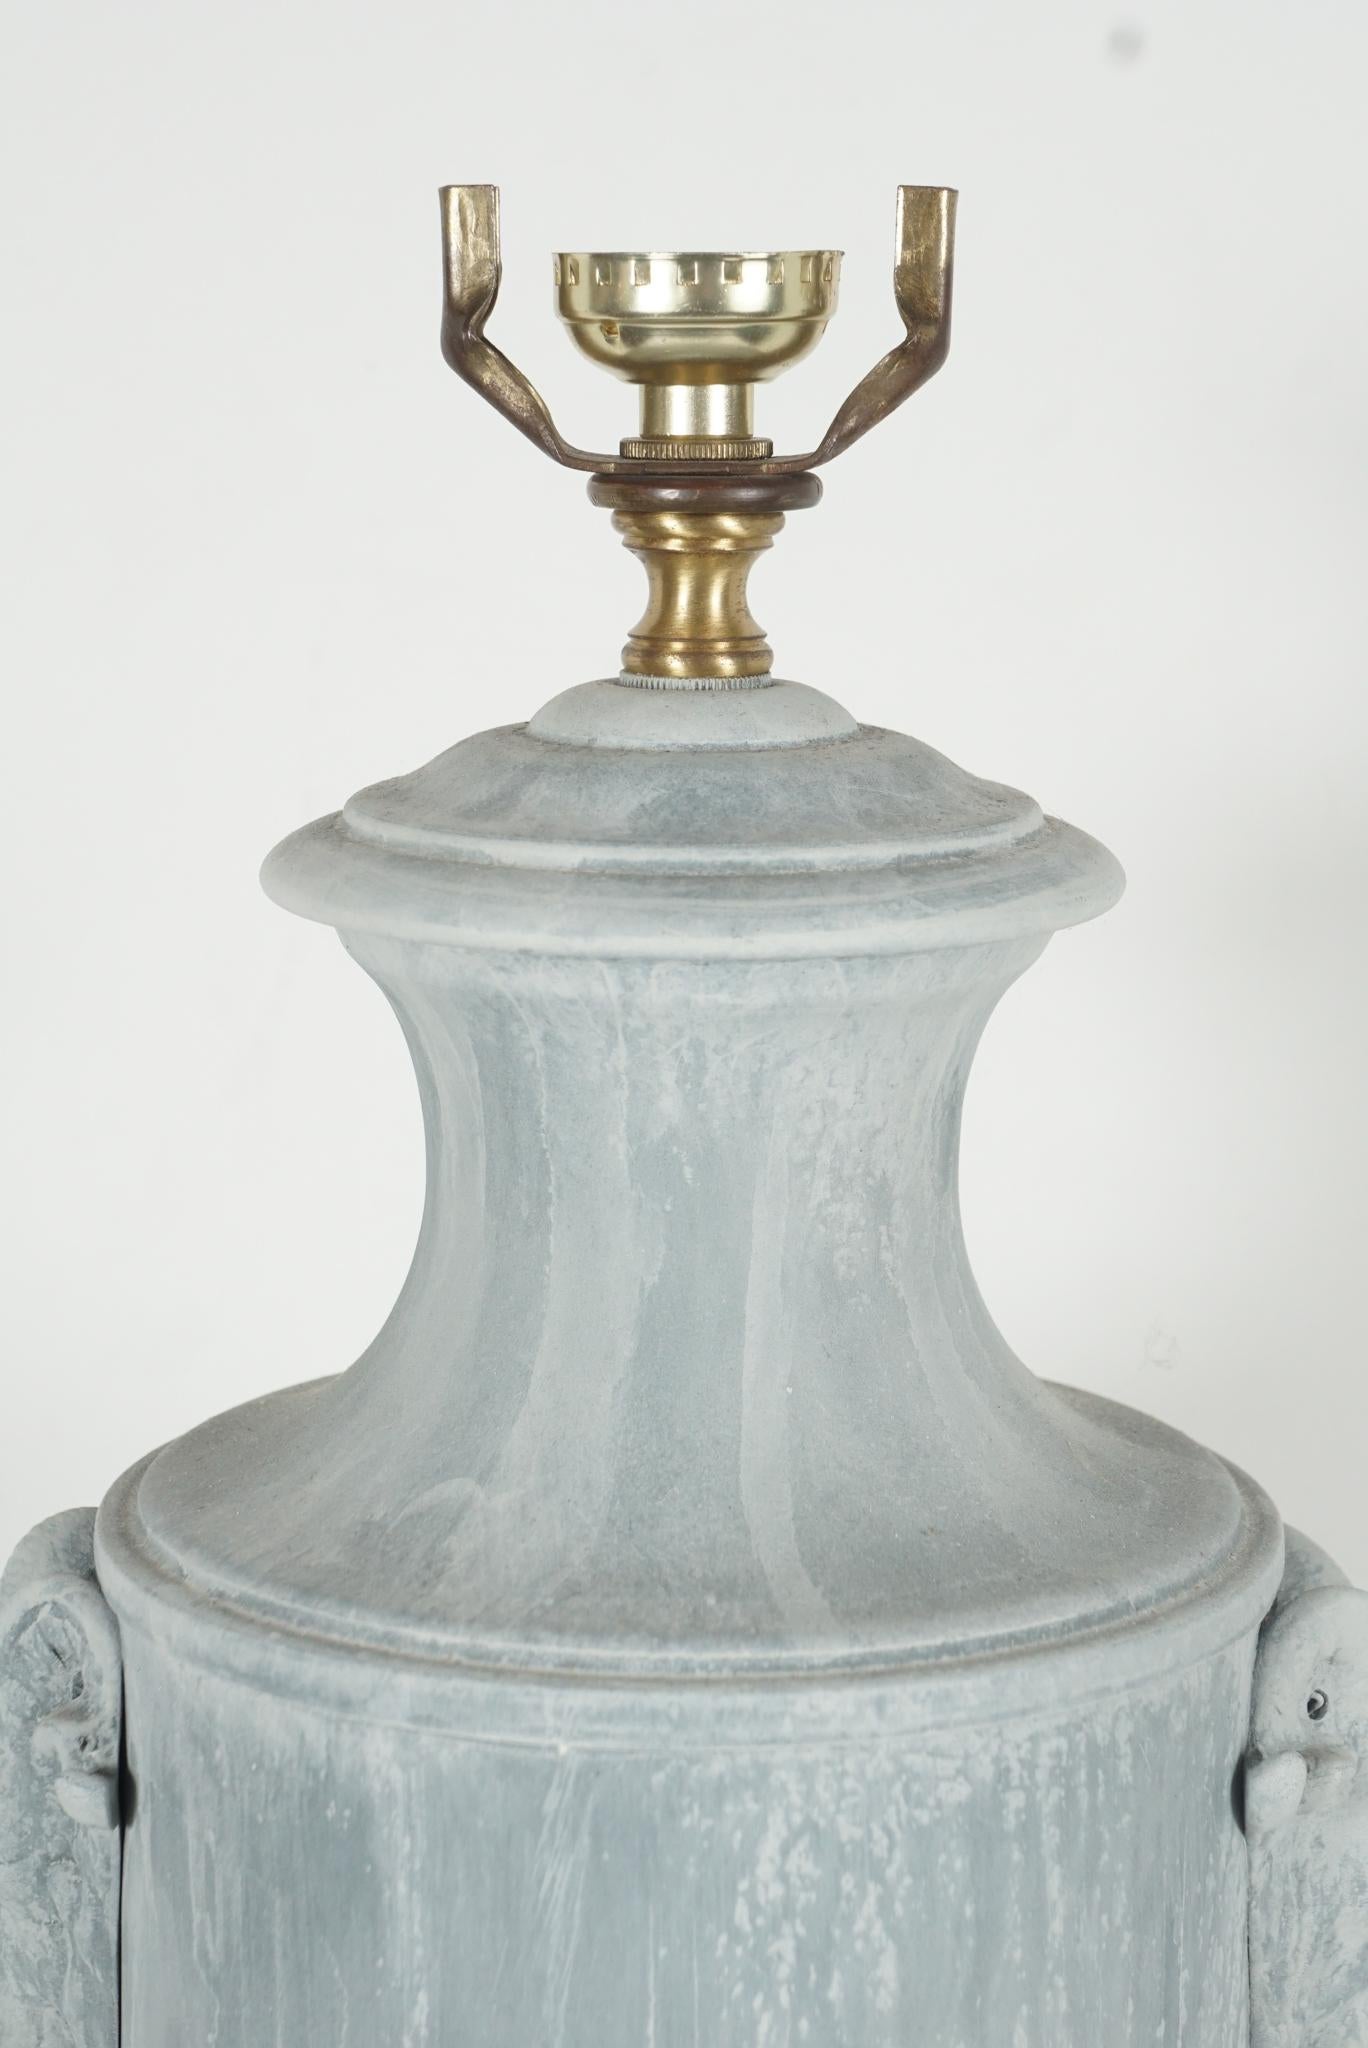 Louis XVI Early 20th Century French Zinc Urn Lamp from the Estate of Bunny Mellon For Sale